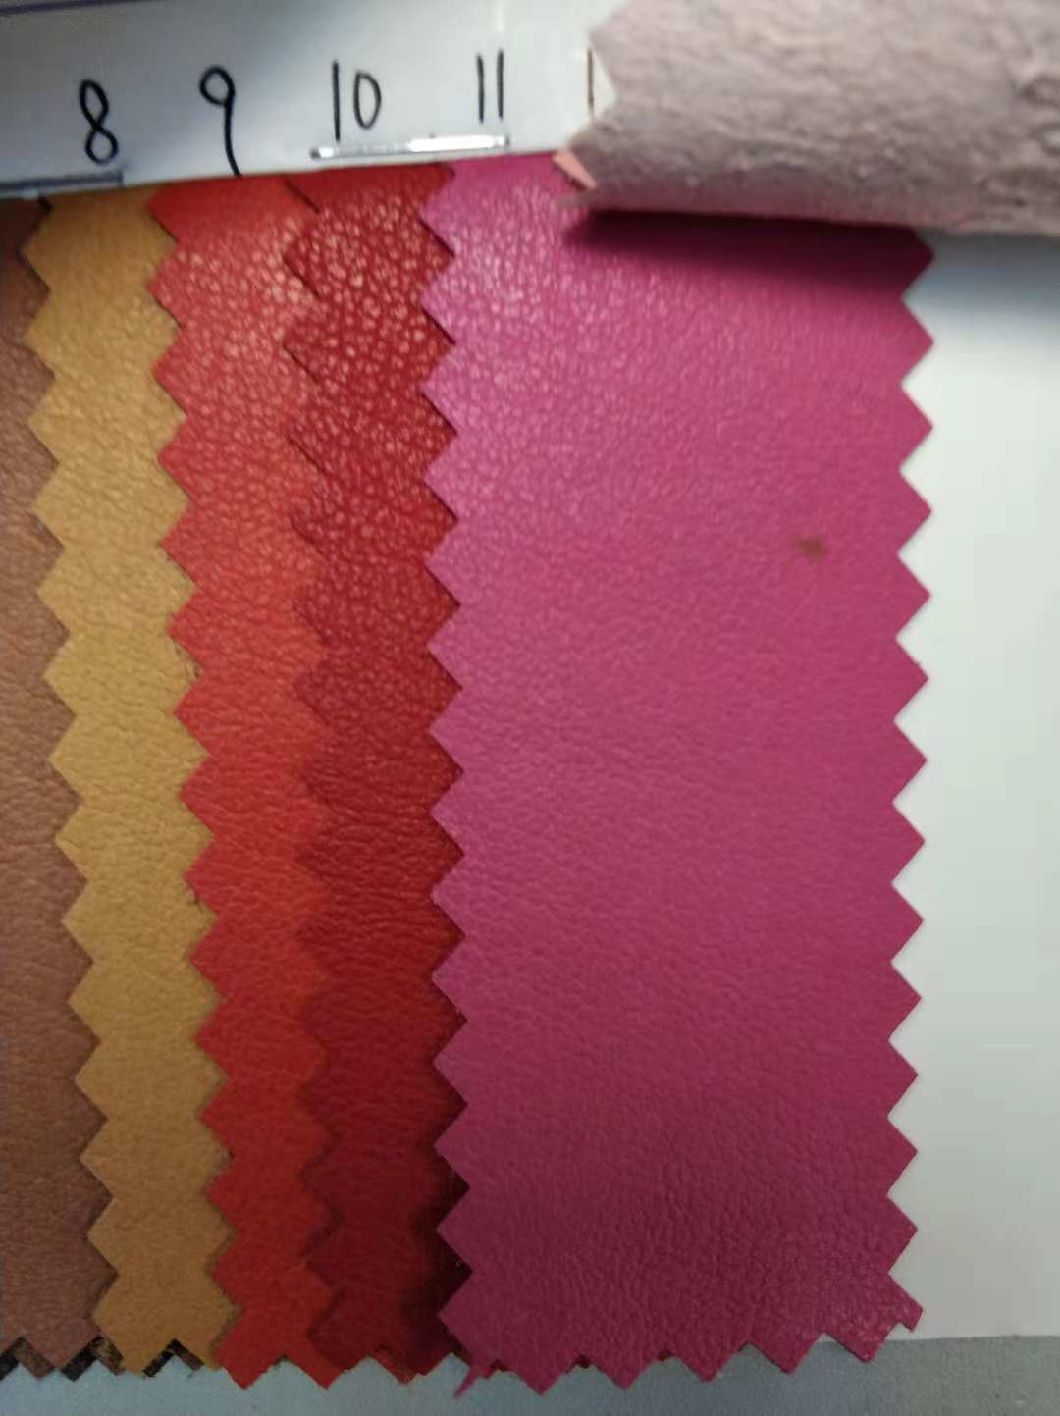 0.6 mm Microfiber Smooth Synthetic PU Leather Fabric for Shoes, Bags (HT83)